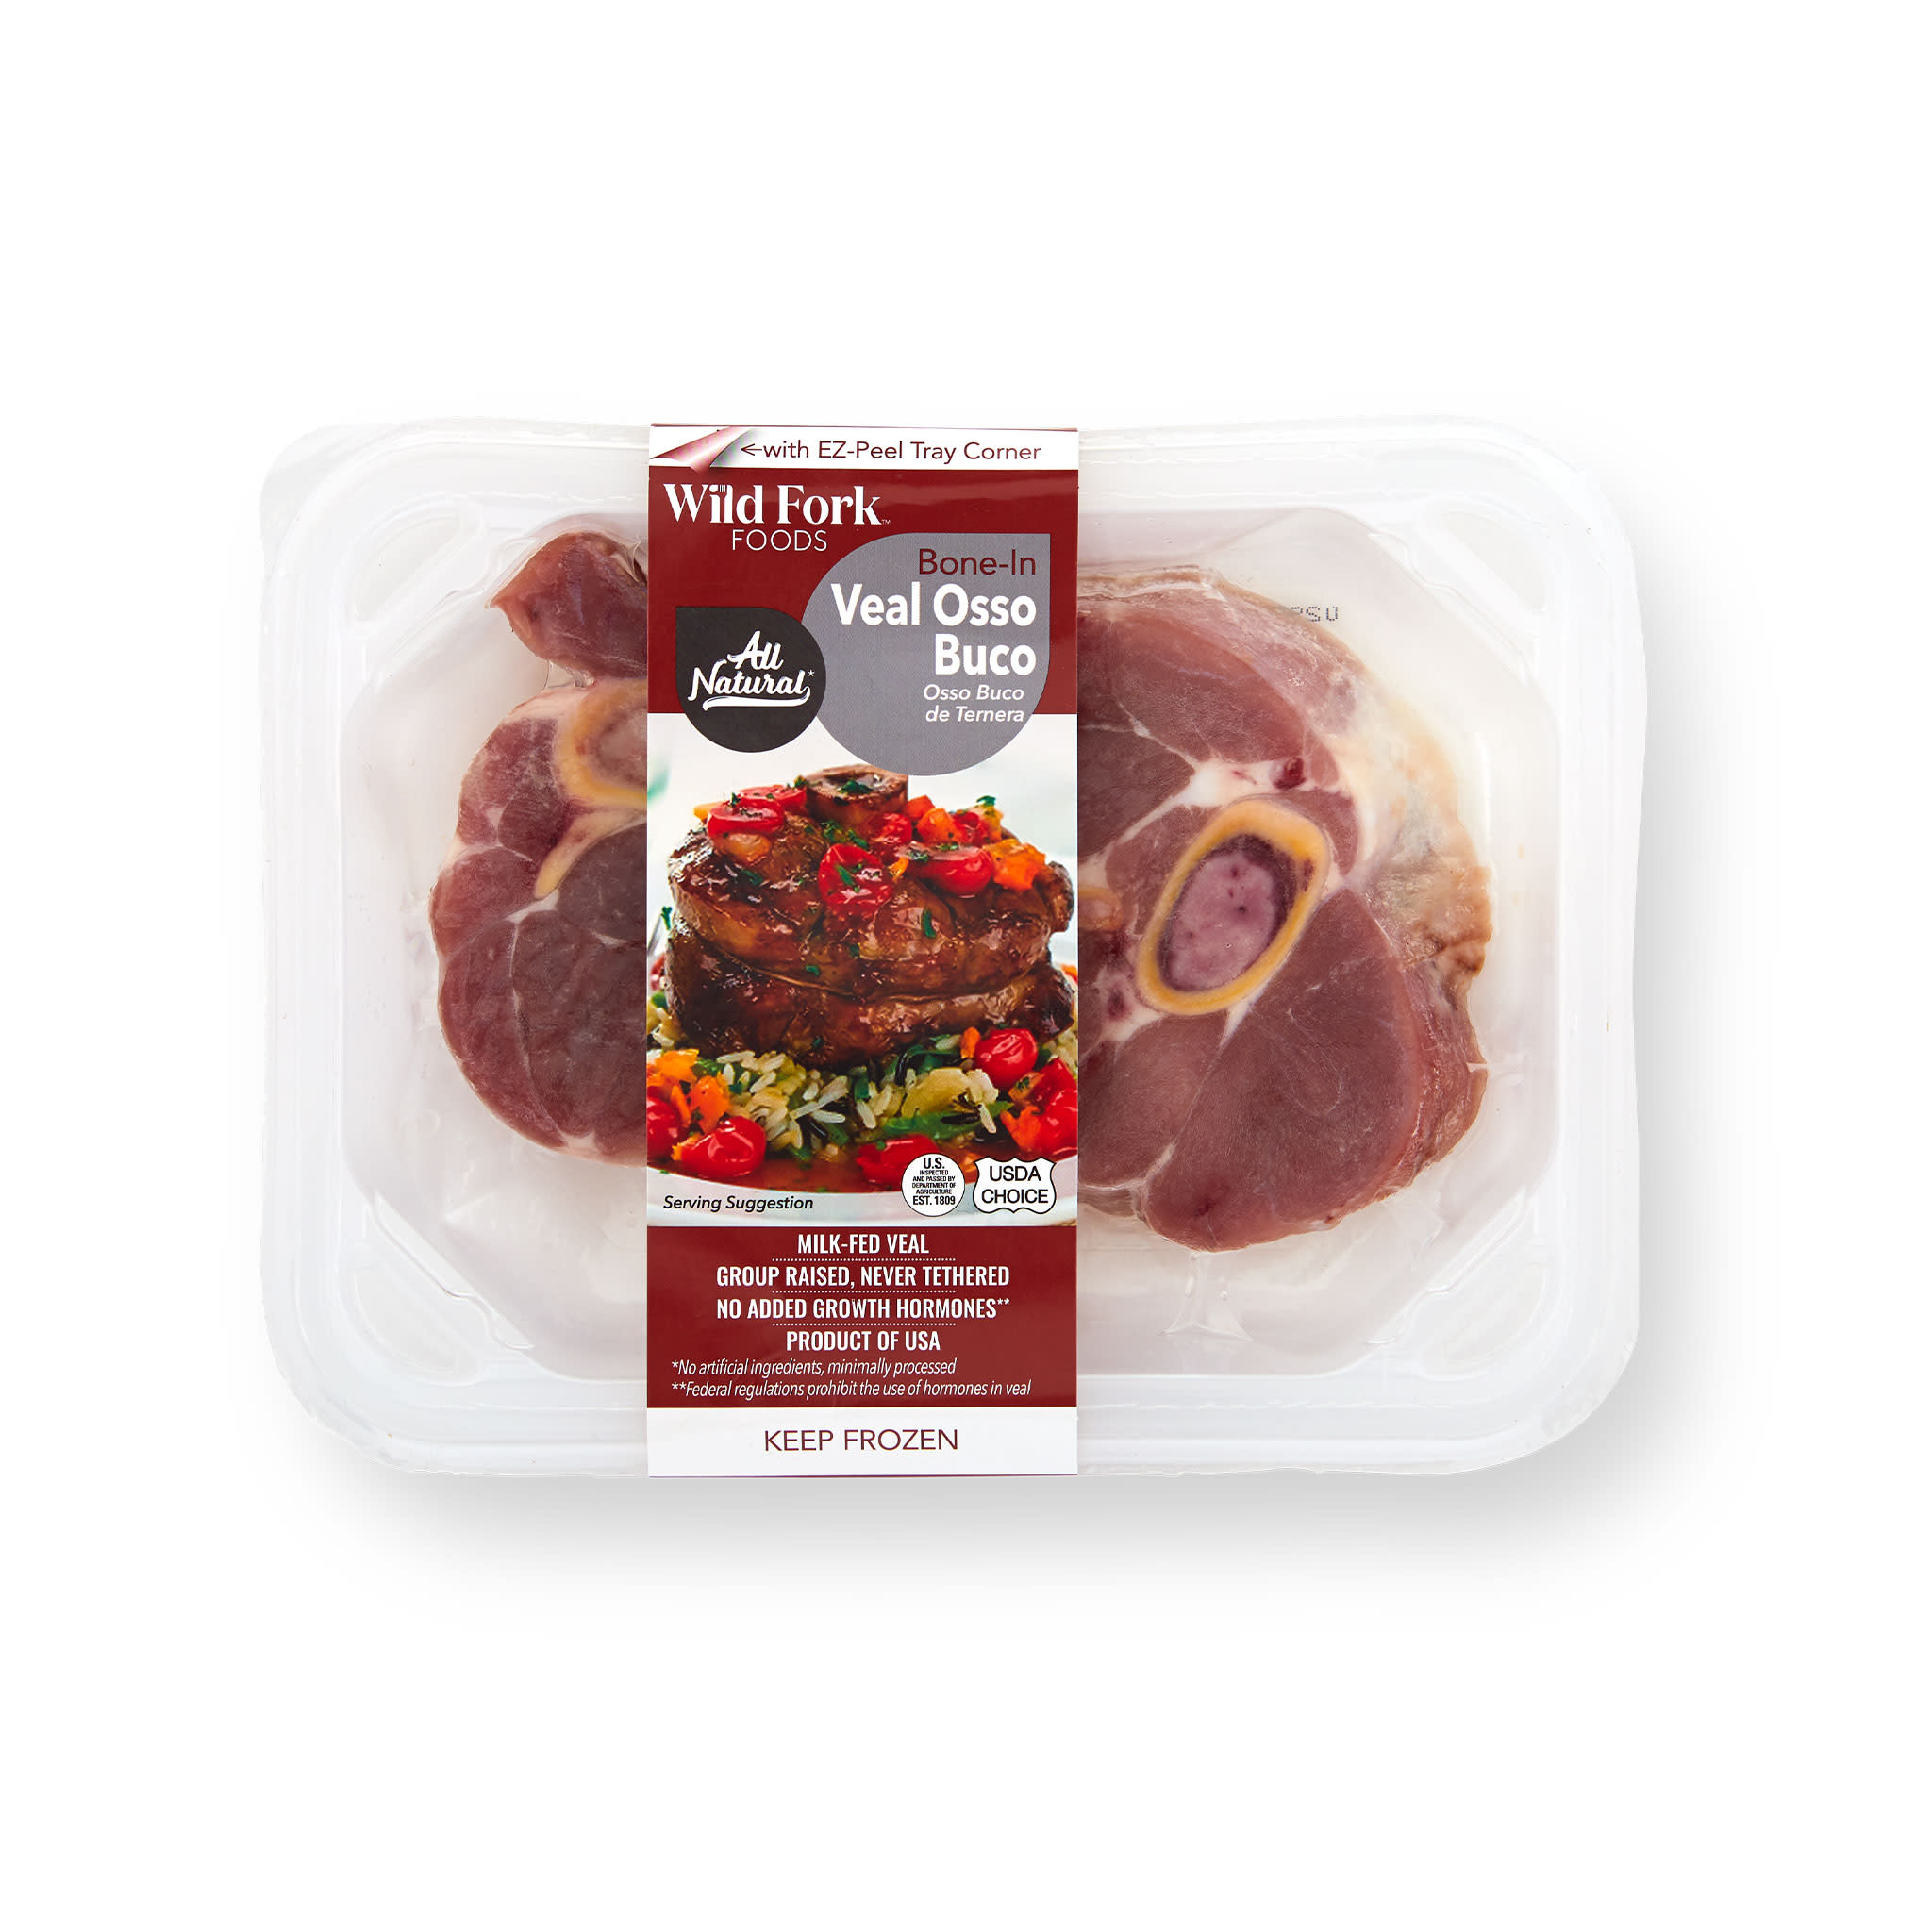 5605 WF PACKAGED Bone-In Veal Osso Buco Specialty Meat